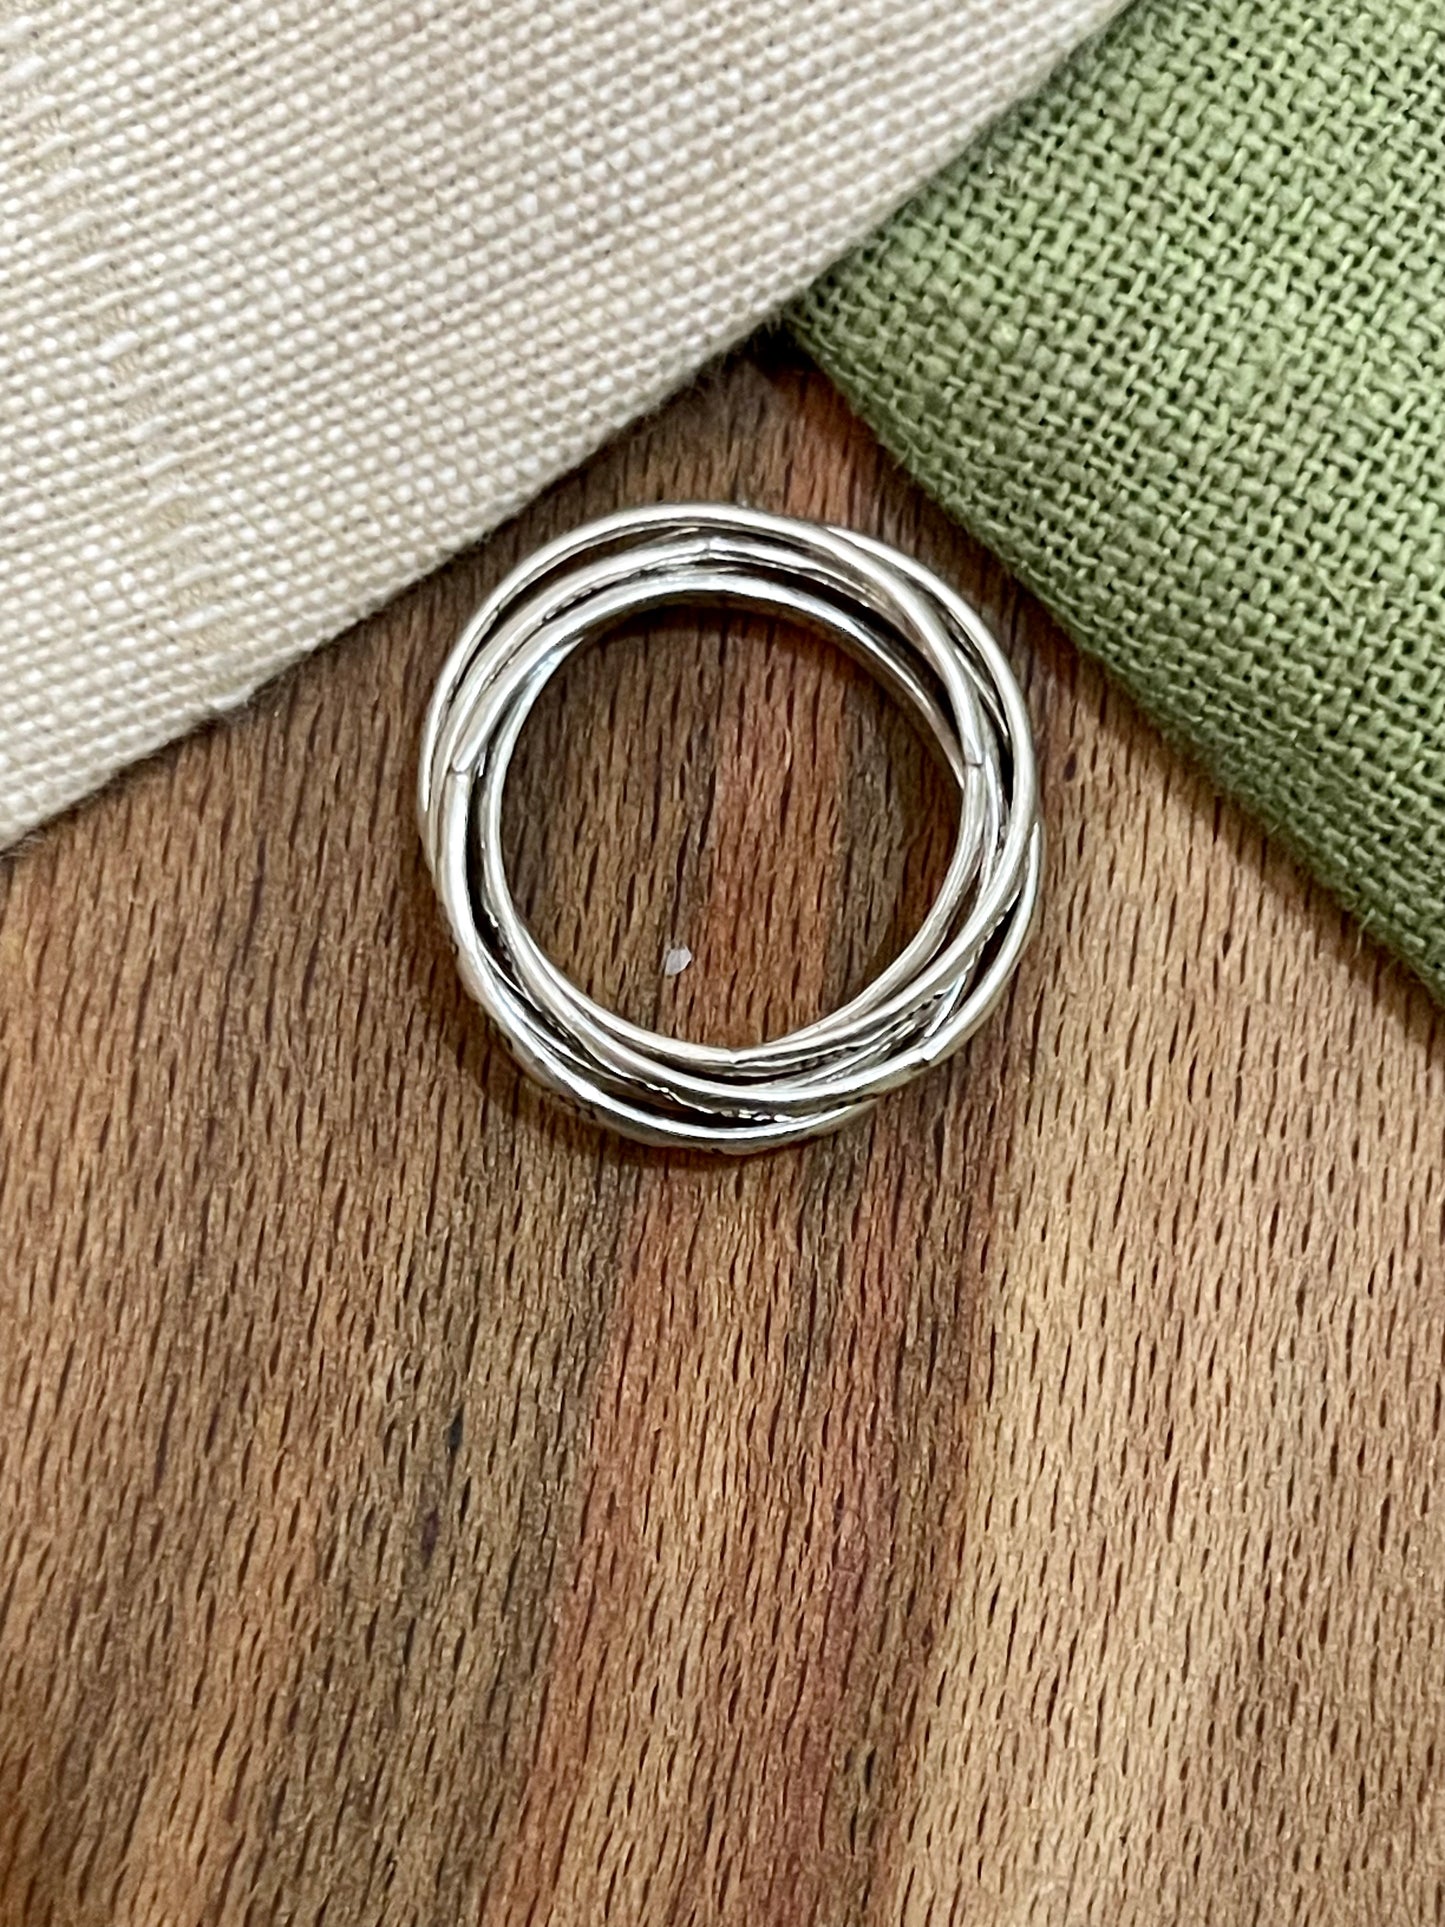 Set of 5 Stacking Rings 925 Silver Ring SIZE 9 R Jewelry Handmade Vintage